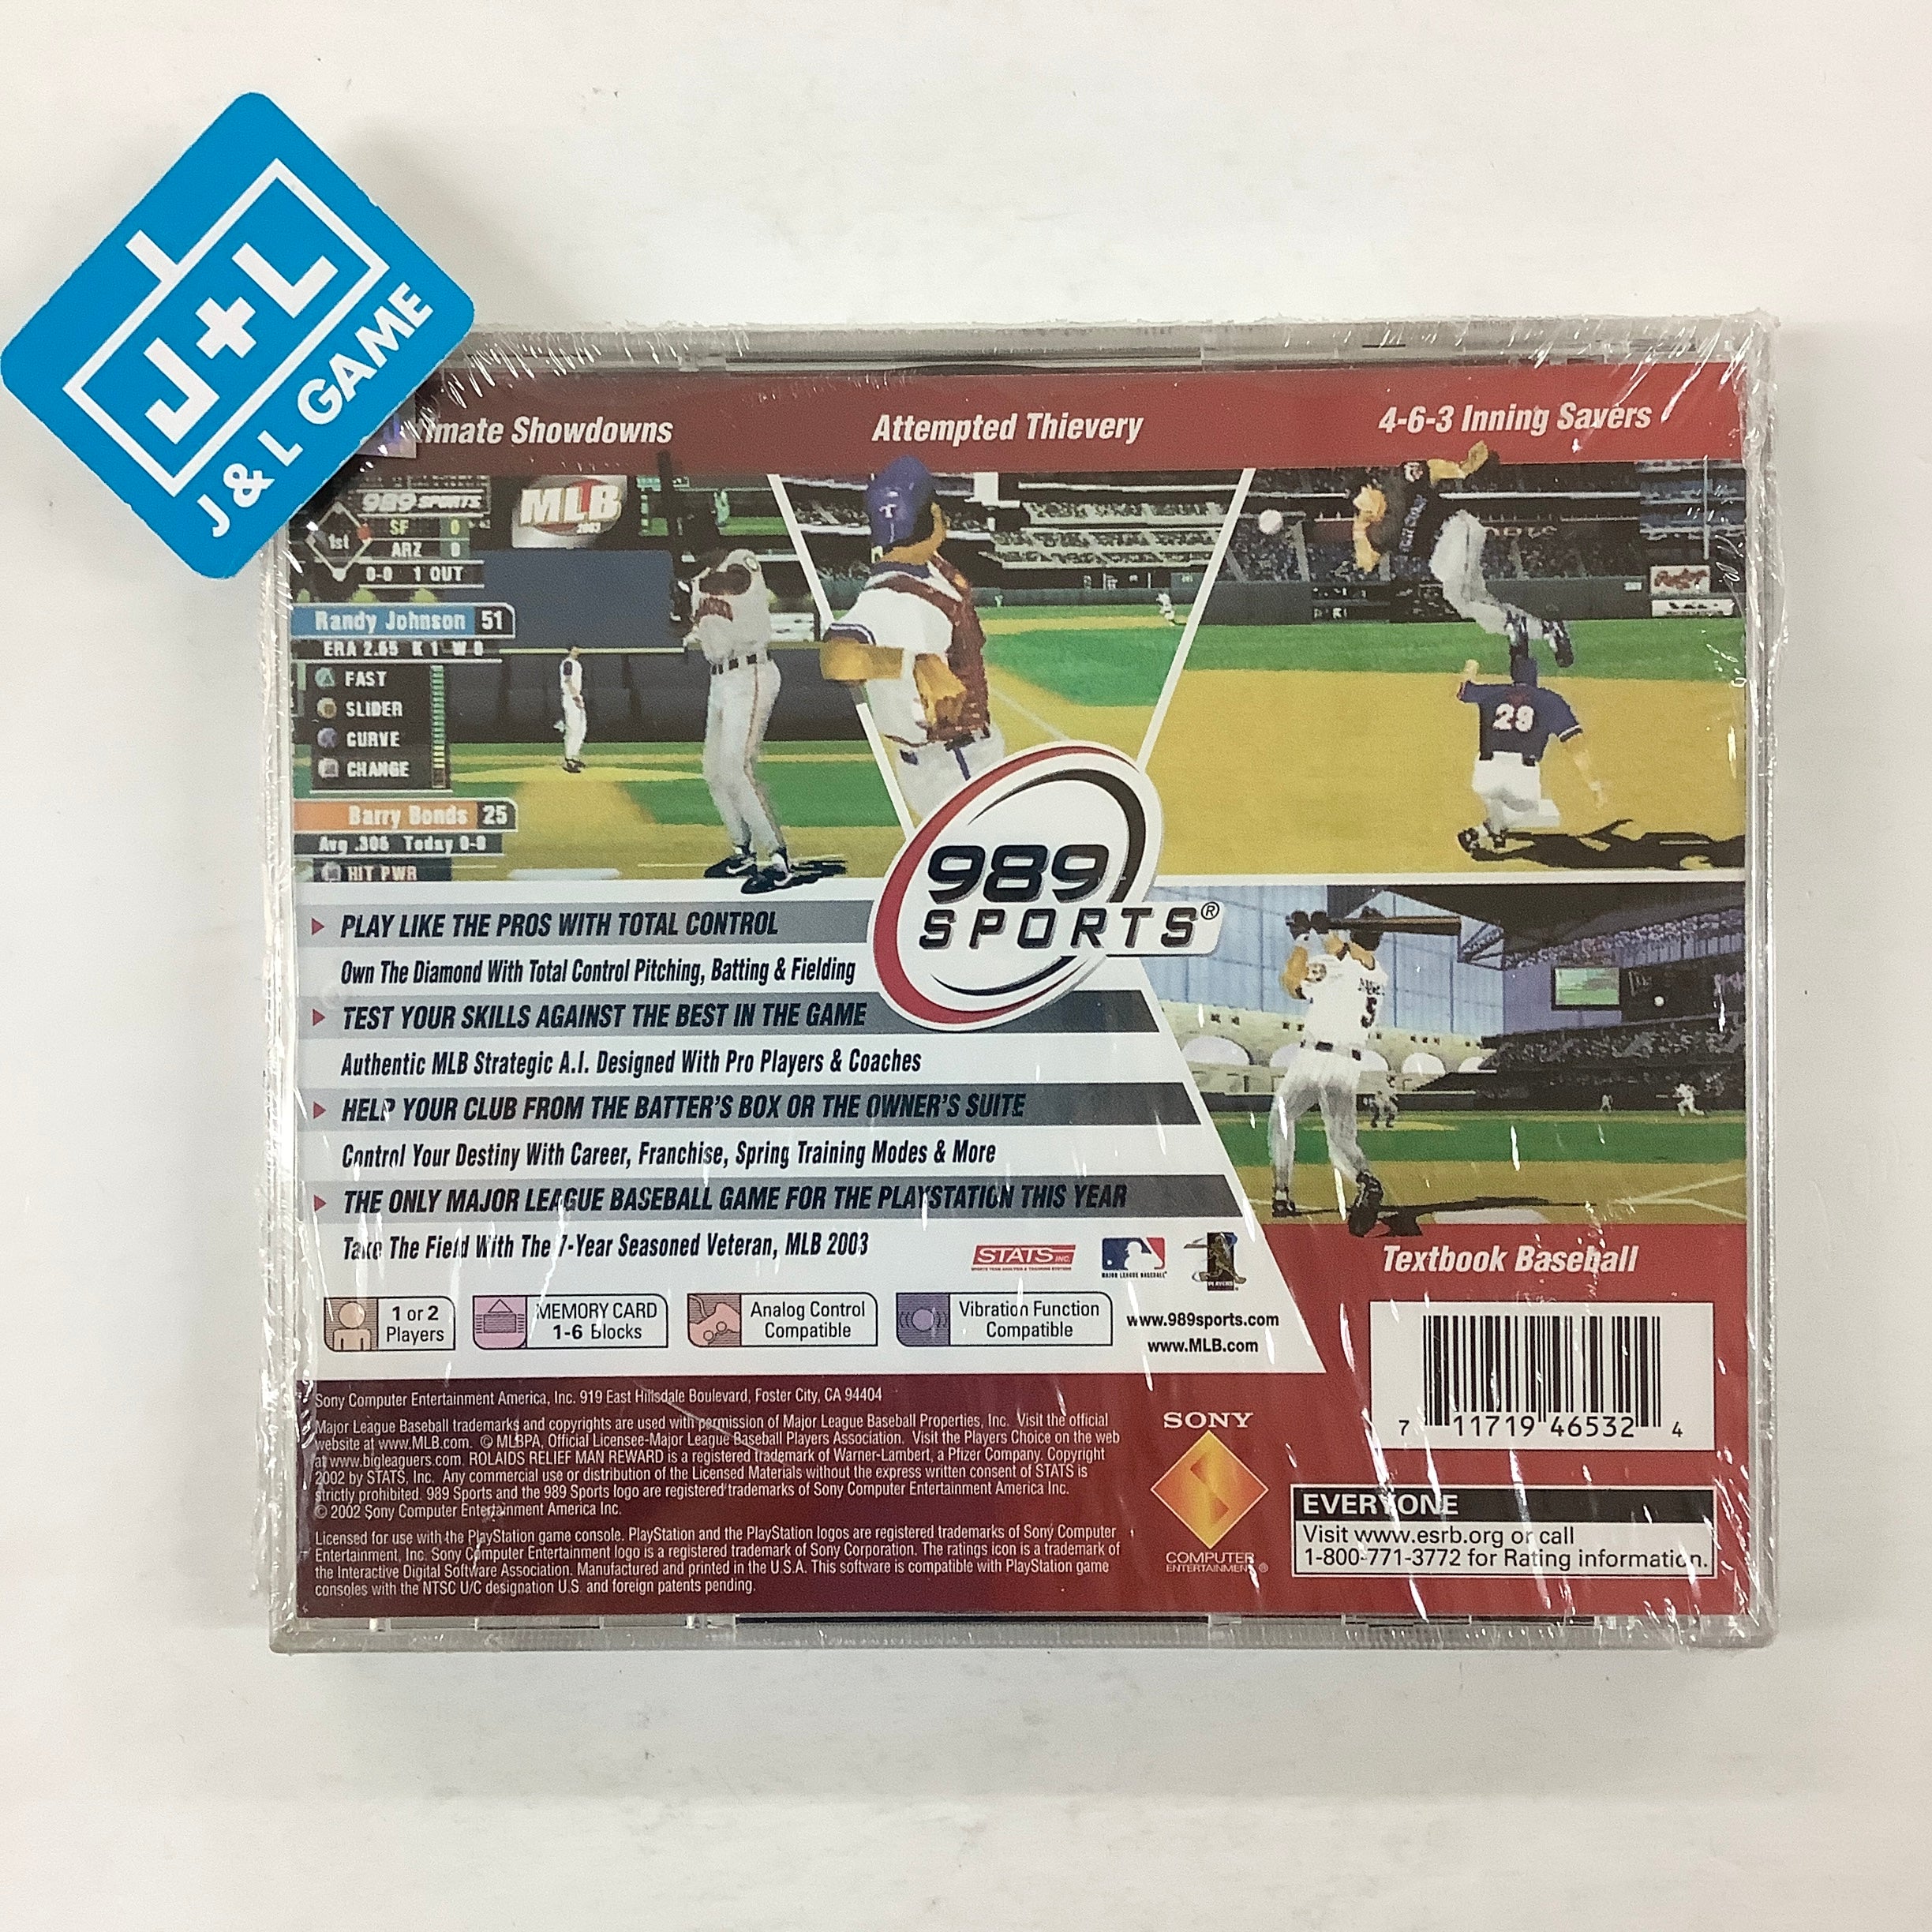 MLB 2003 - (PS1) PlayStation 1 Video Games SCEA   